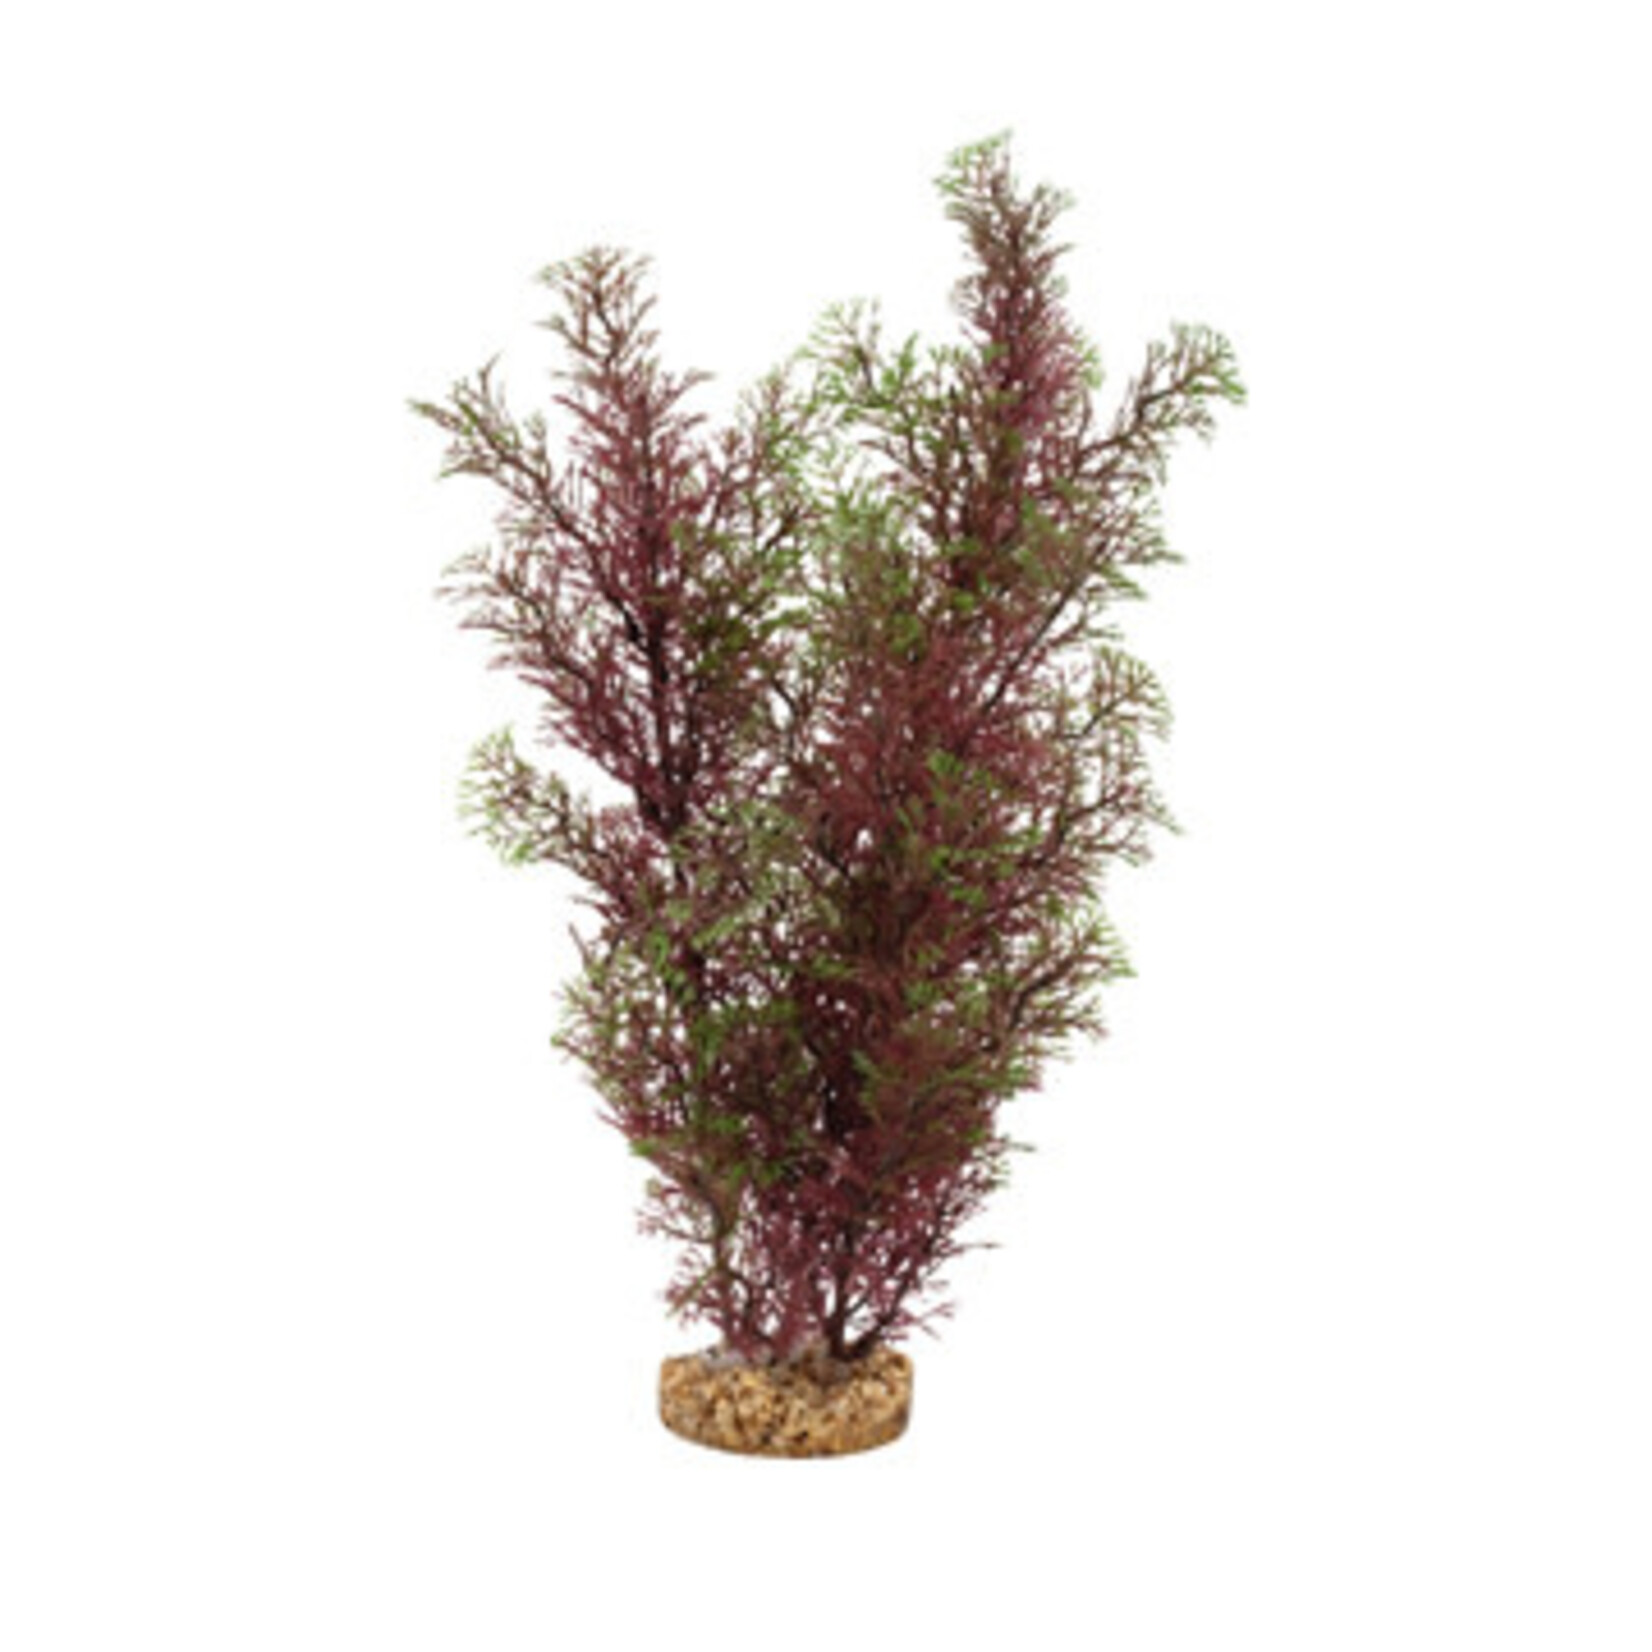 Fluval Fluval Aqualife Plant Scapes Red/Green Foxtail - 35.5 cm (14 in)